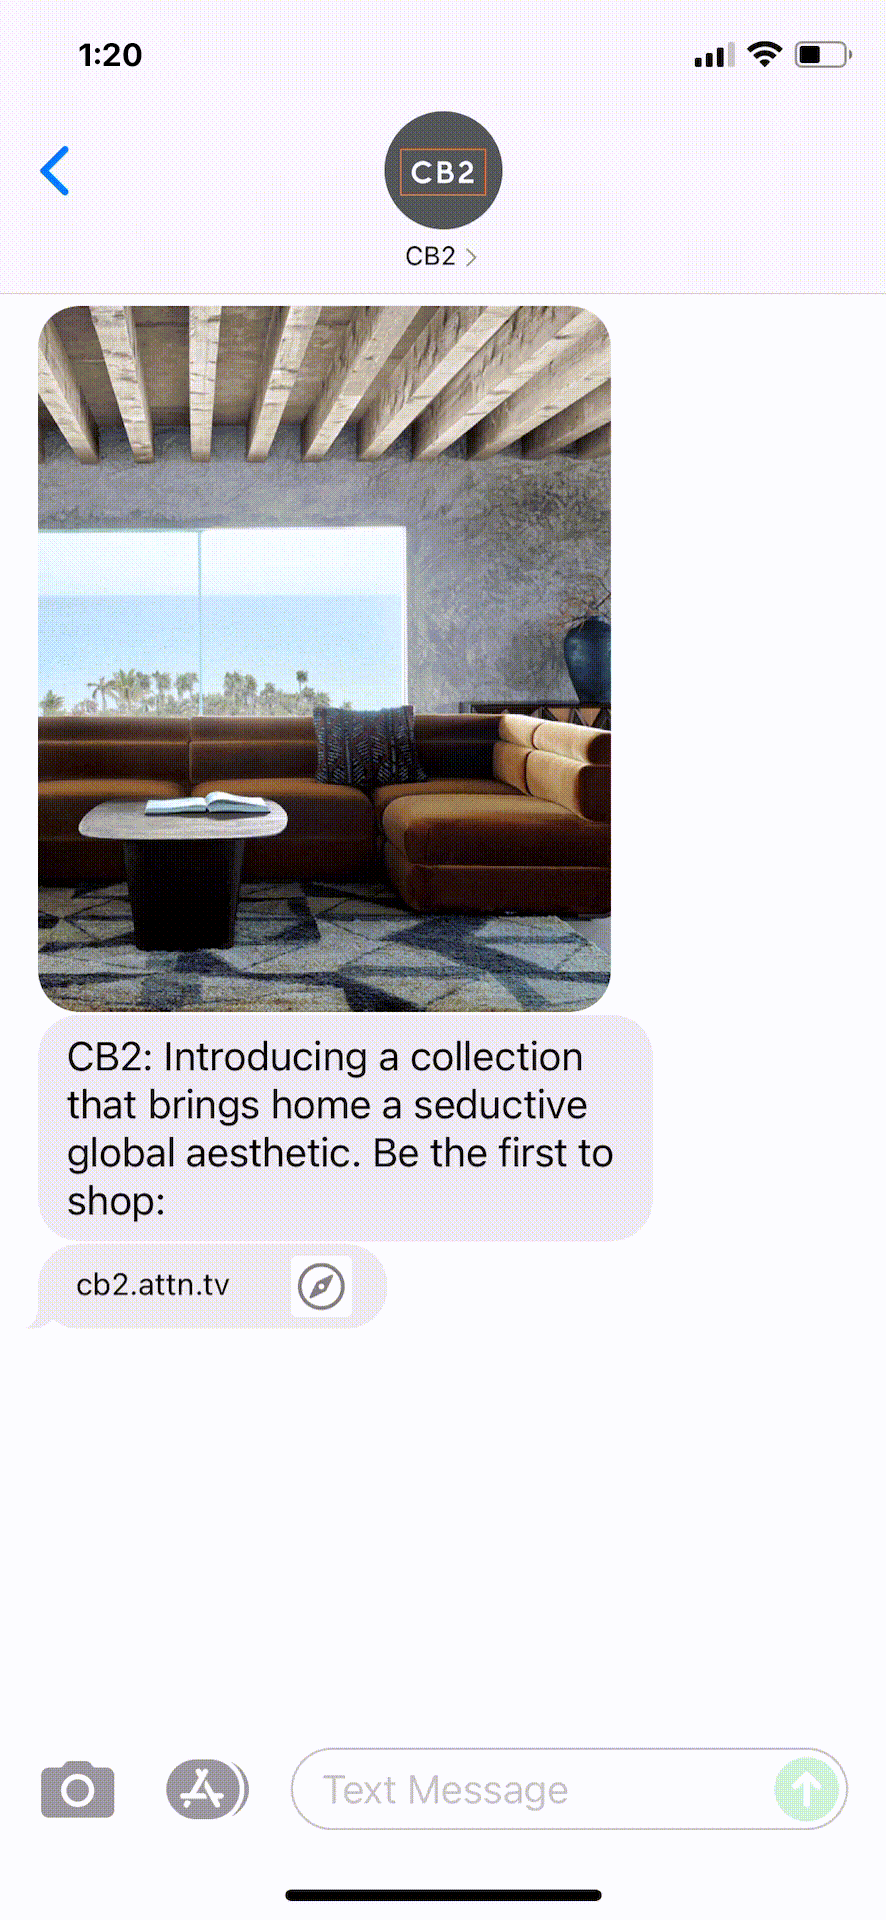 CB2-Text-Message-Marketing-Example-09.30.2021